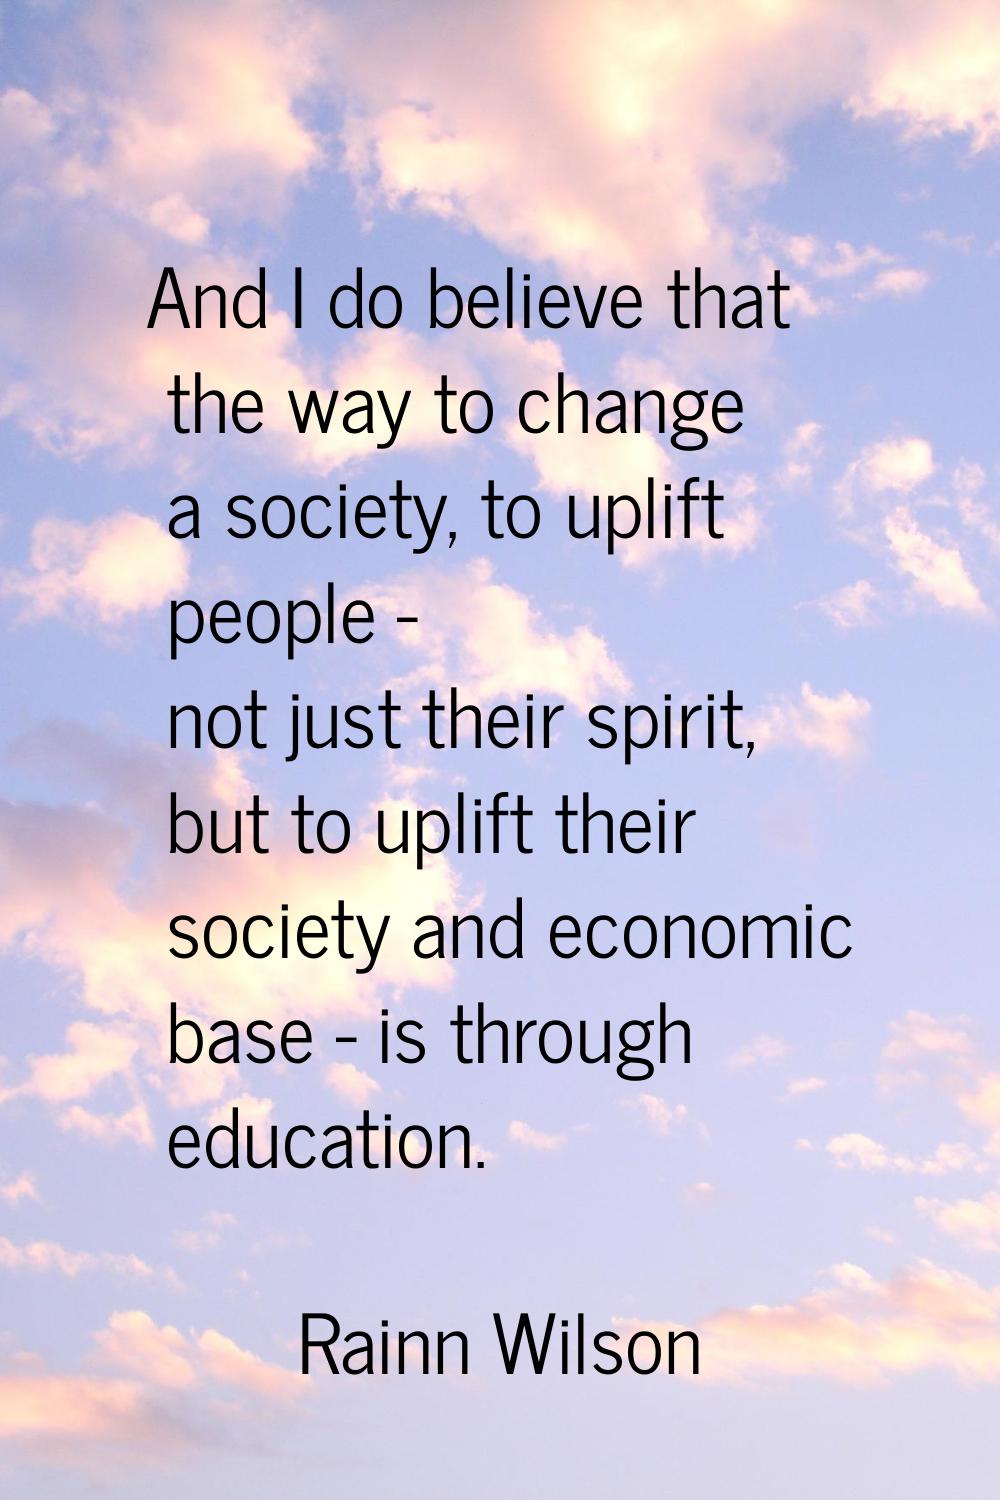 And I do believe that the way to change a society, to uplift people - not just their spirit, but to